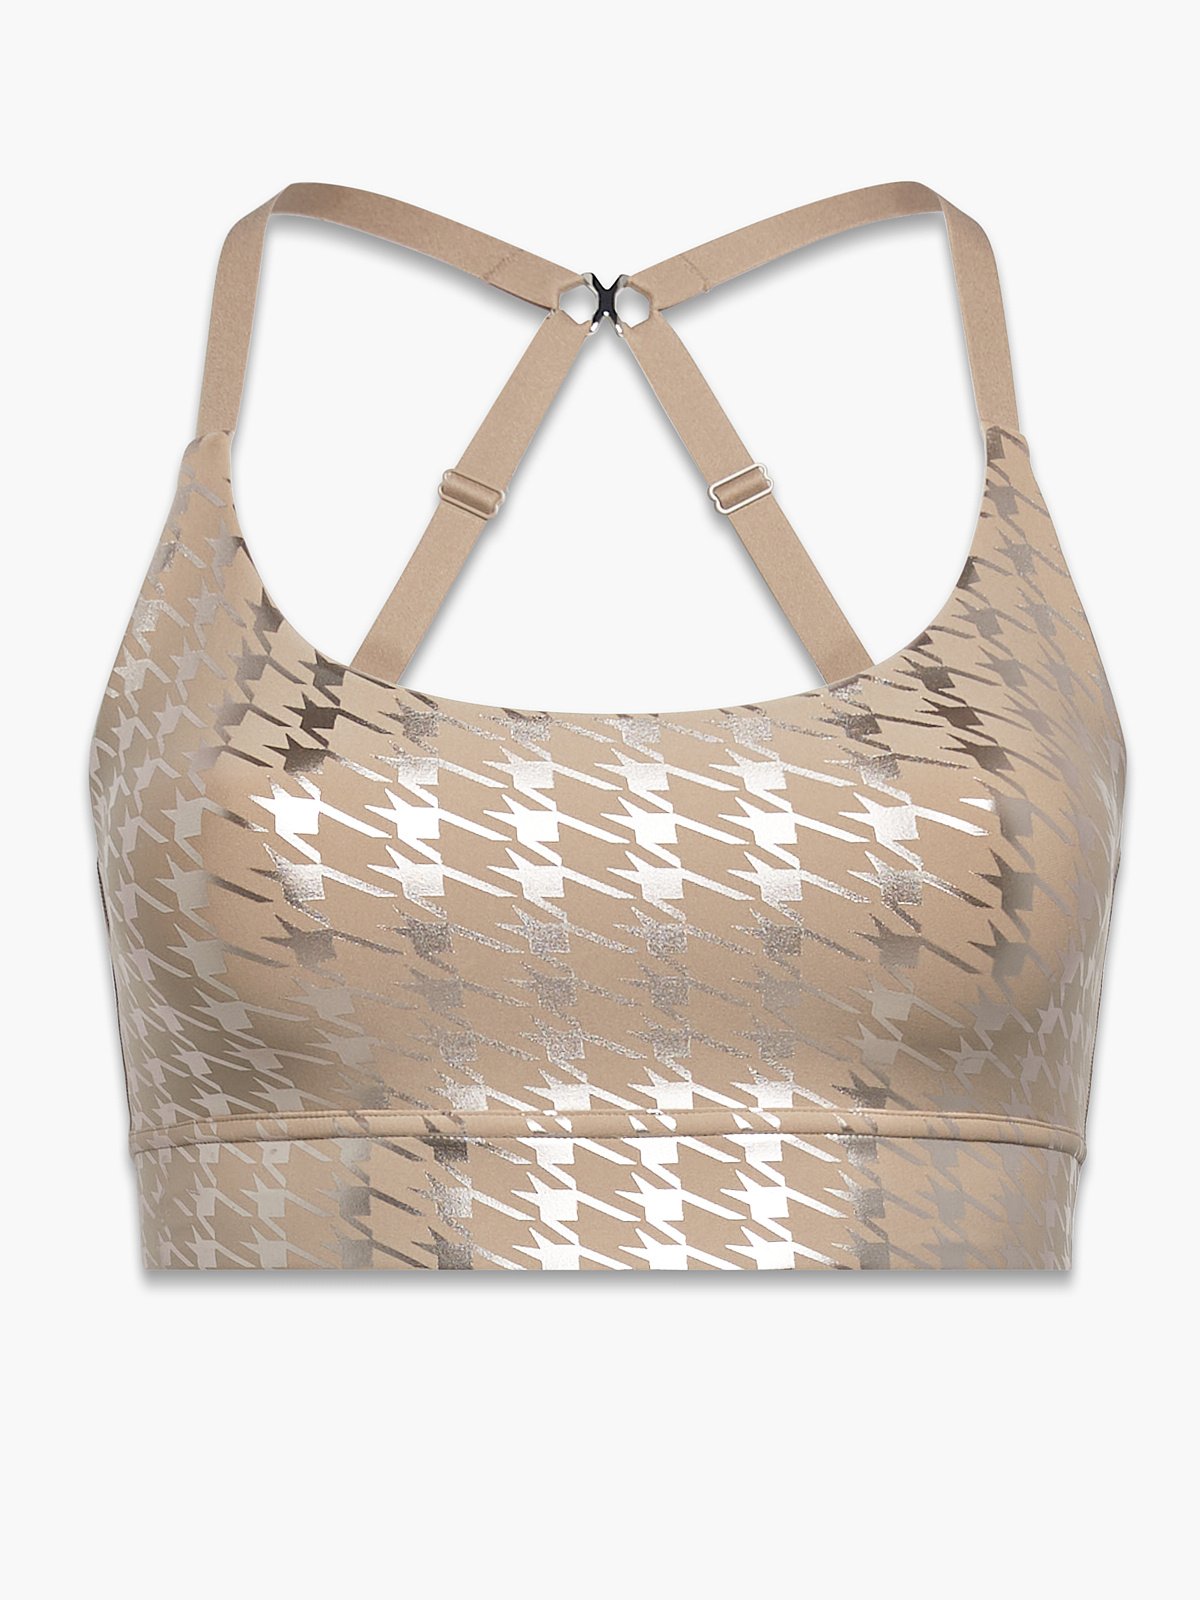 Band-It Houndstooth Low-Impact Sports Bra